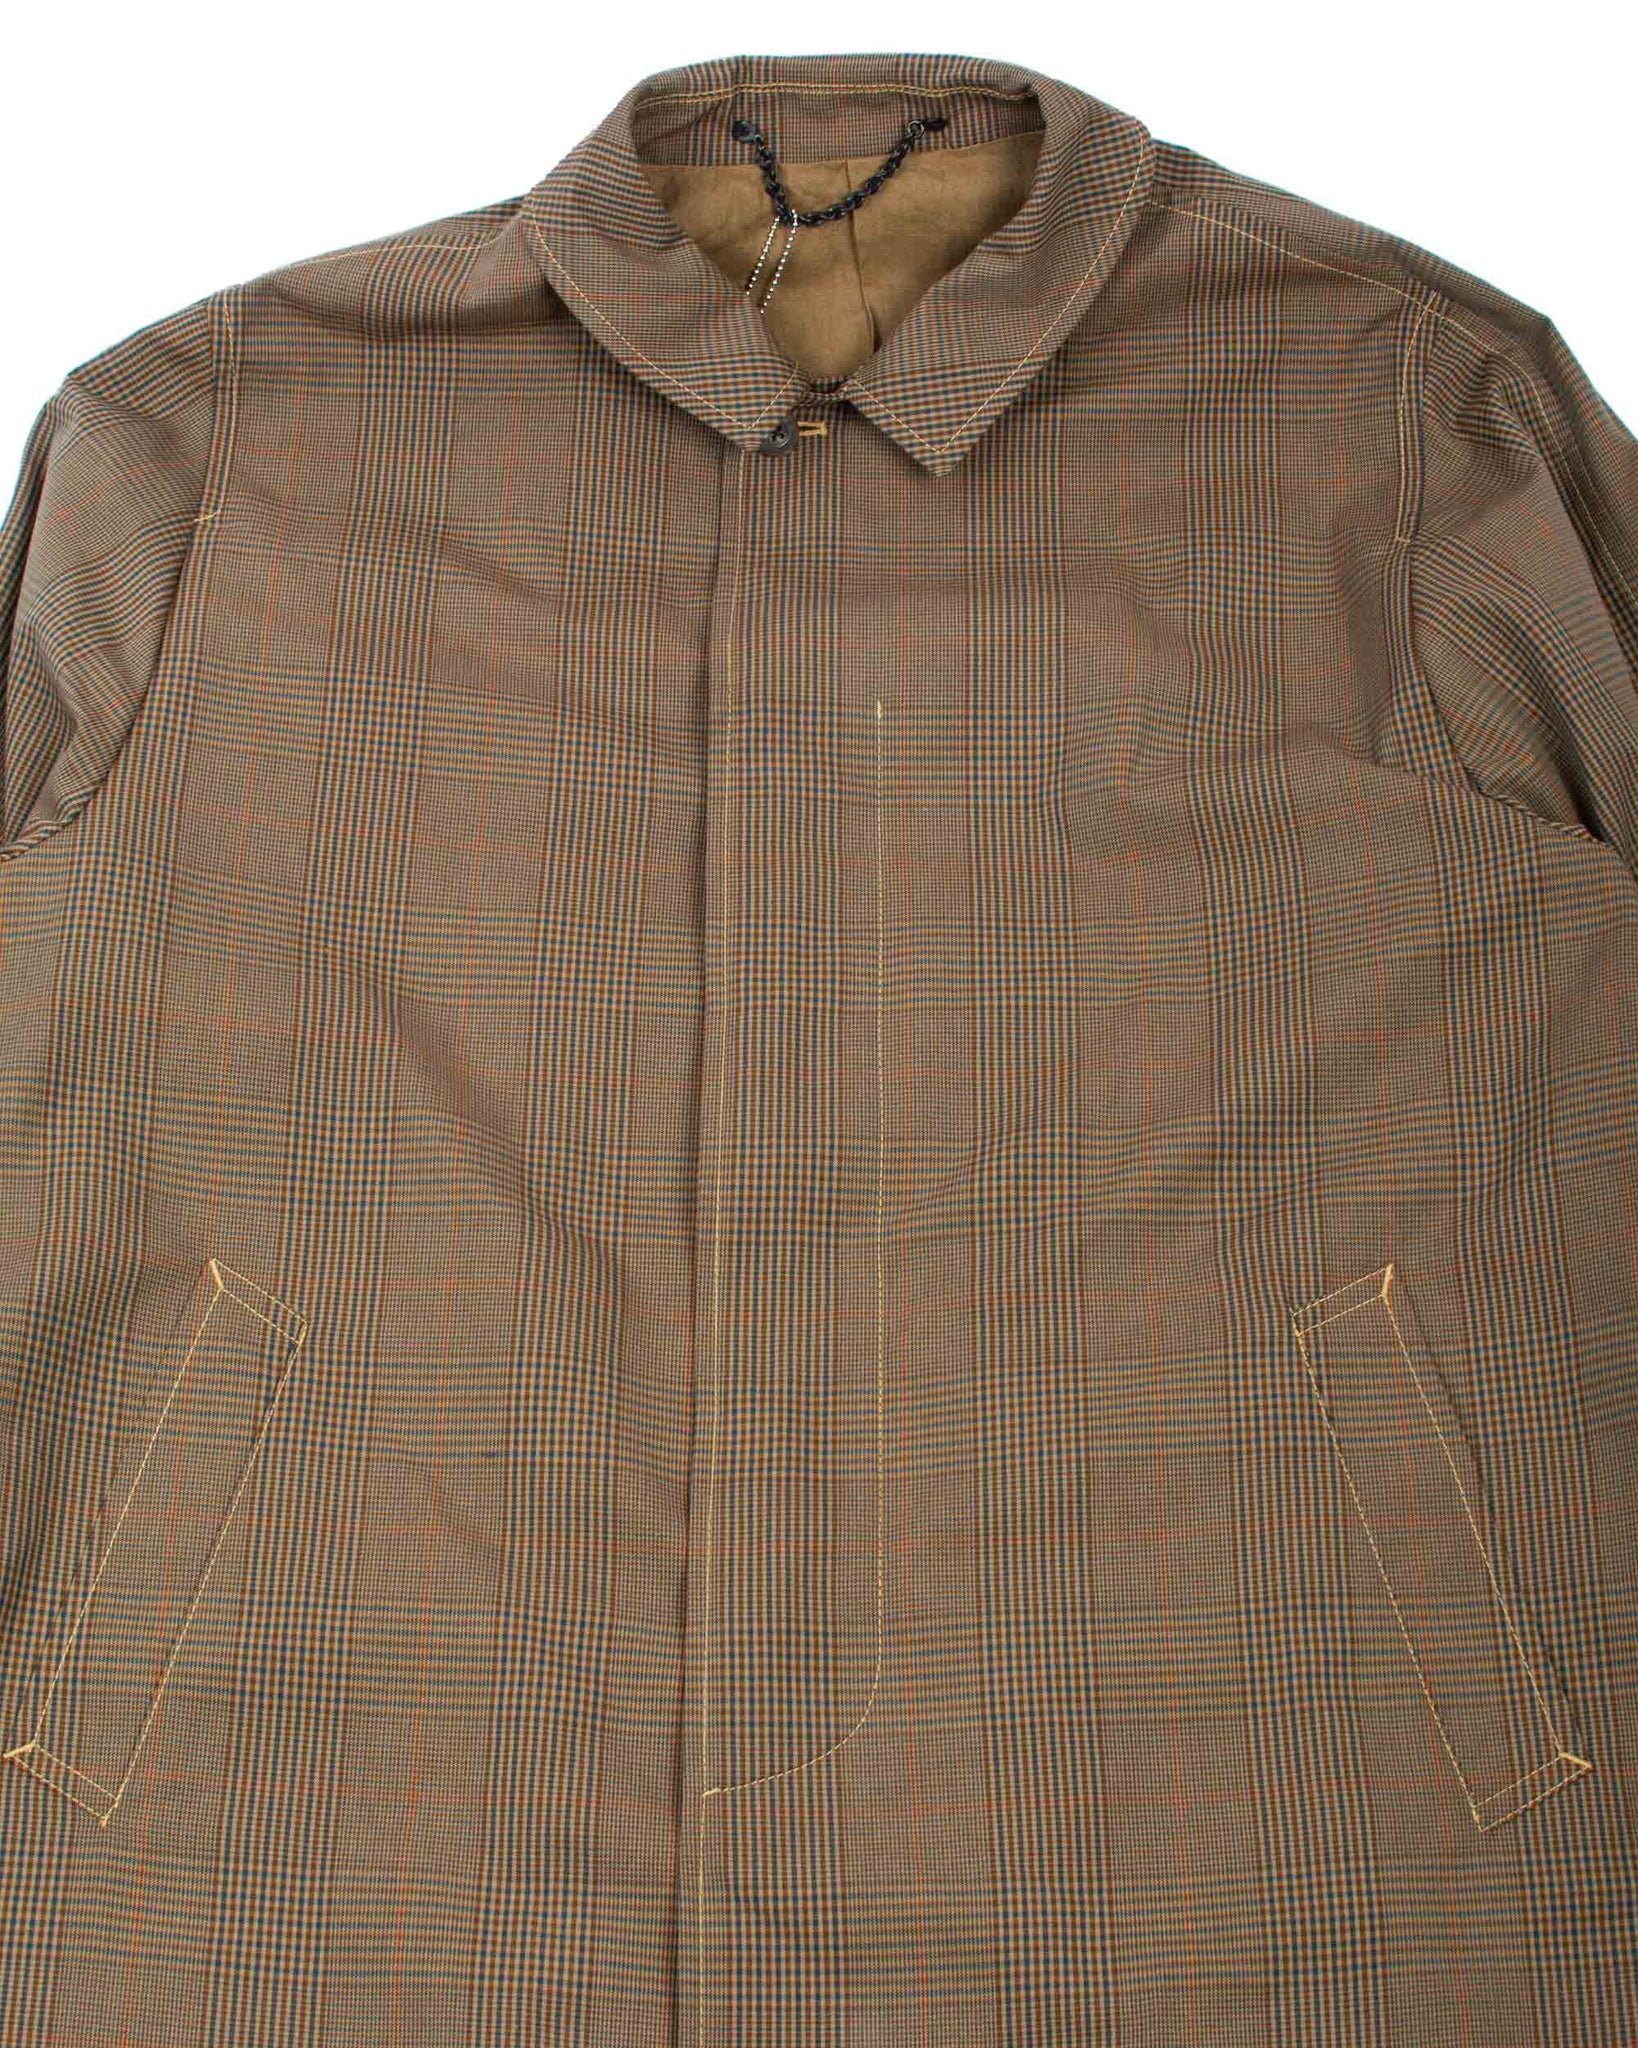 The Real McCoy's MJ22017 Plaid-Check Rain Weather Coat Brown Details